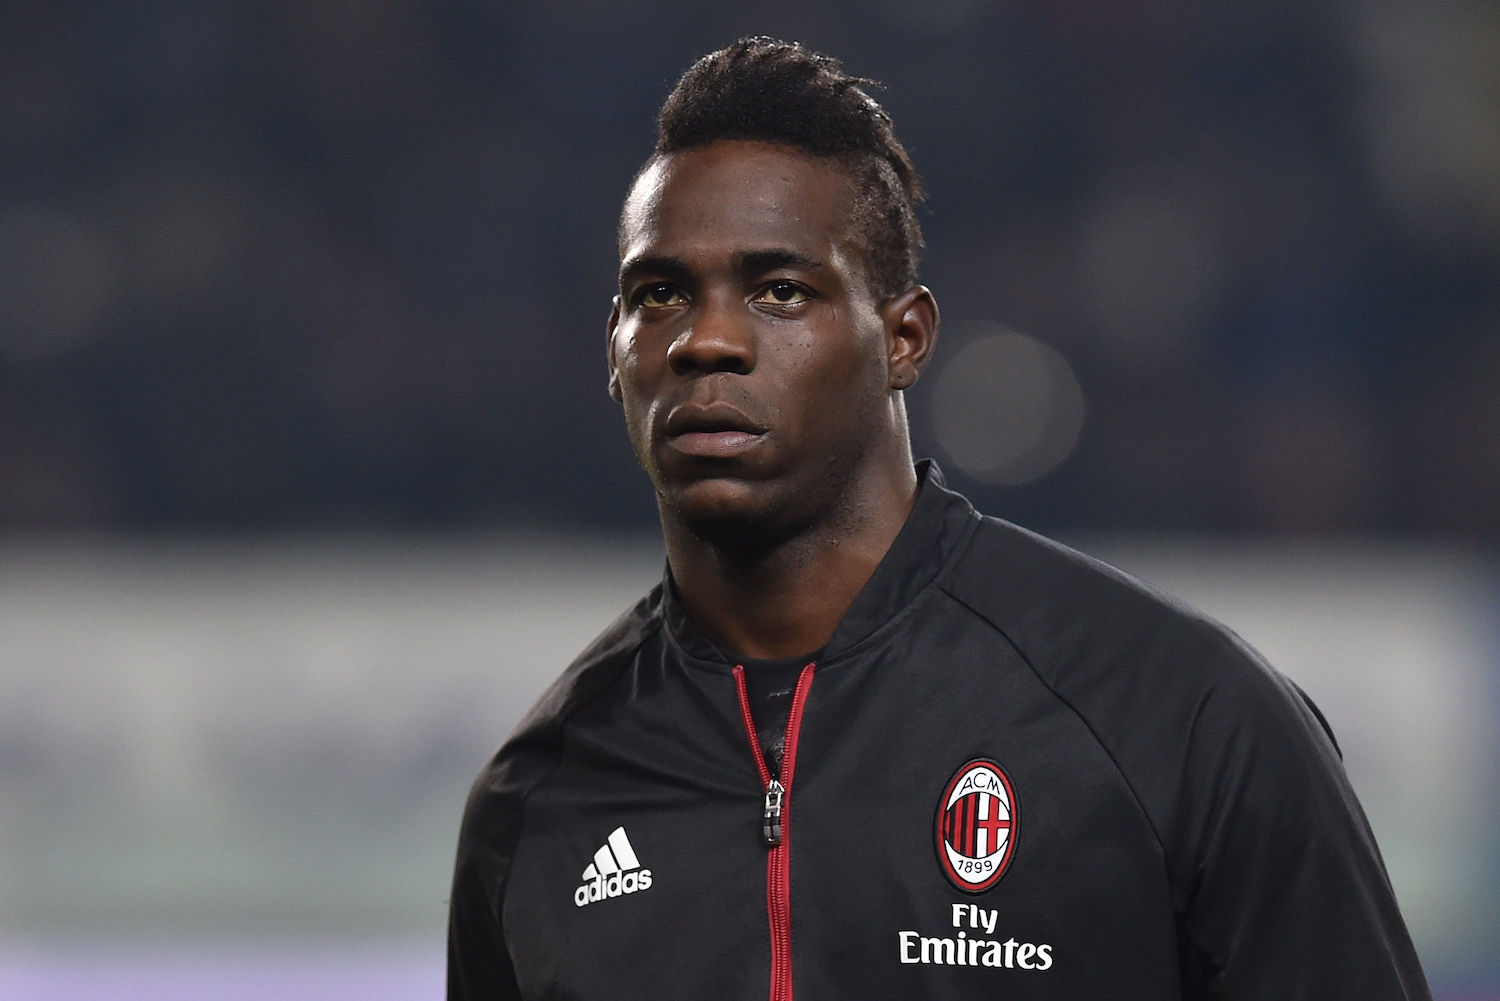 Balotelli looks on ahead of the cup match against Alessandria. | Valerio Pennicino/Getty Images